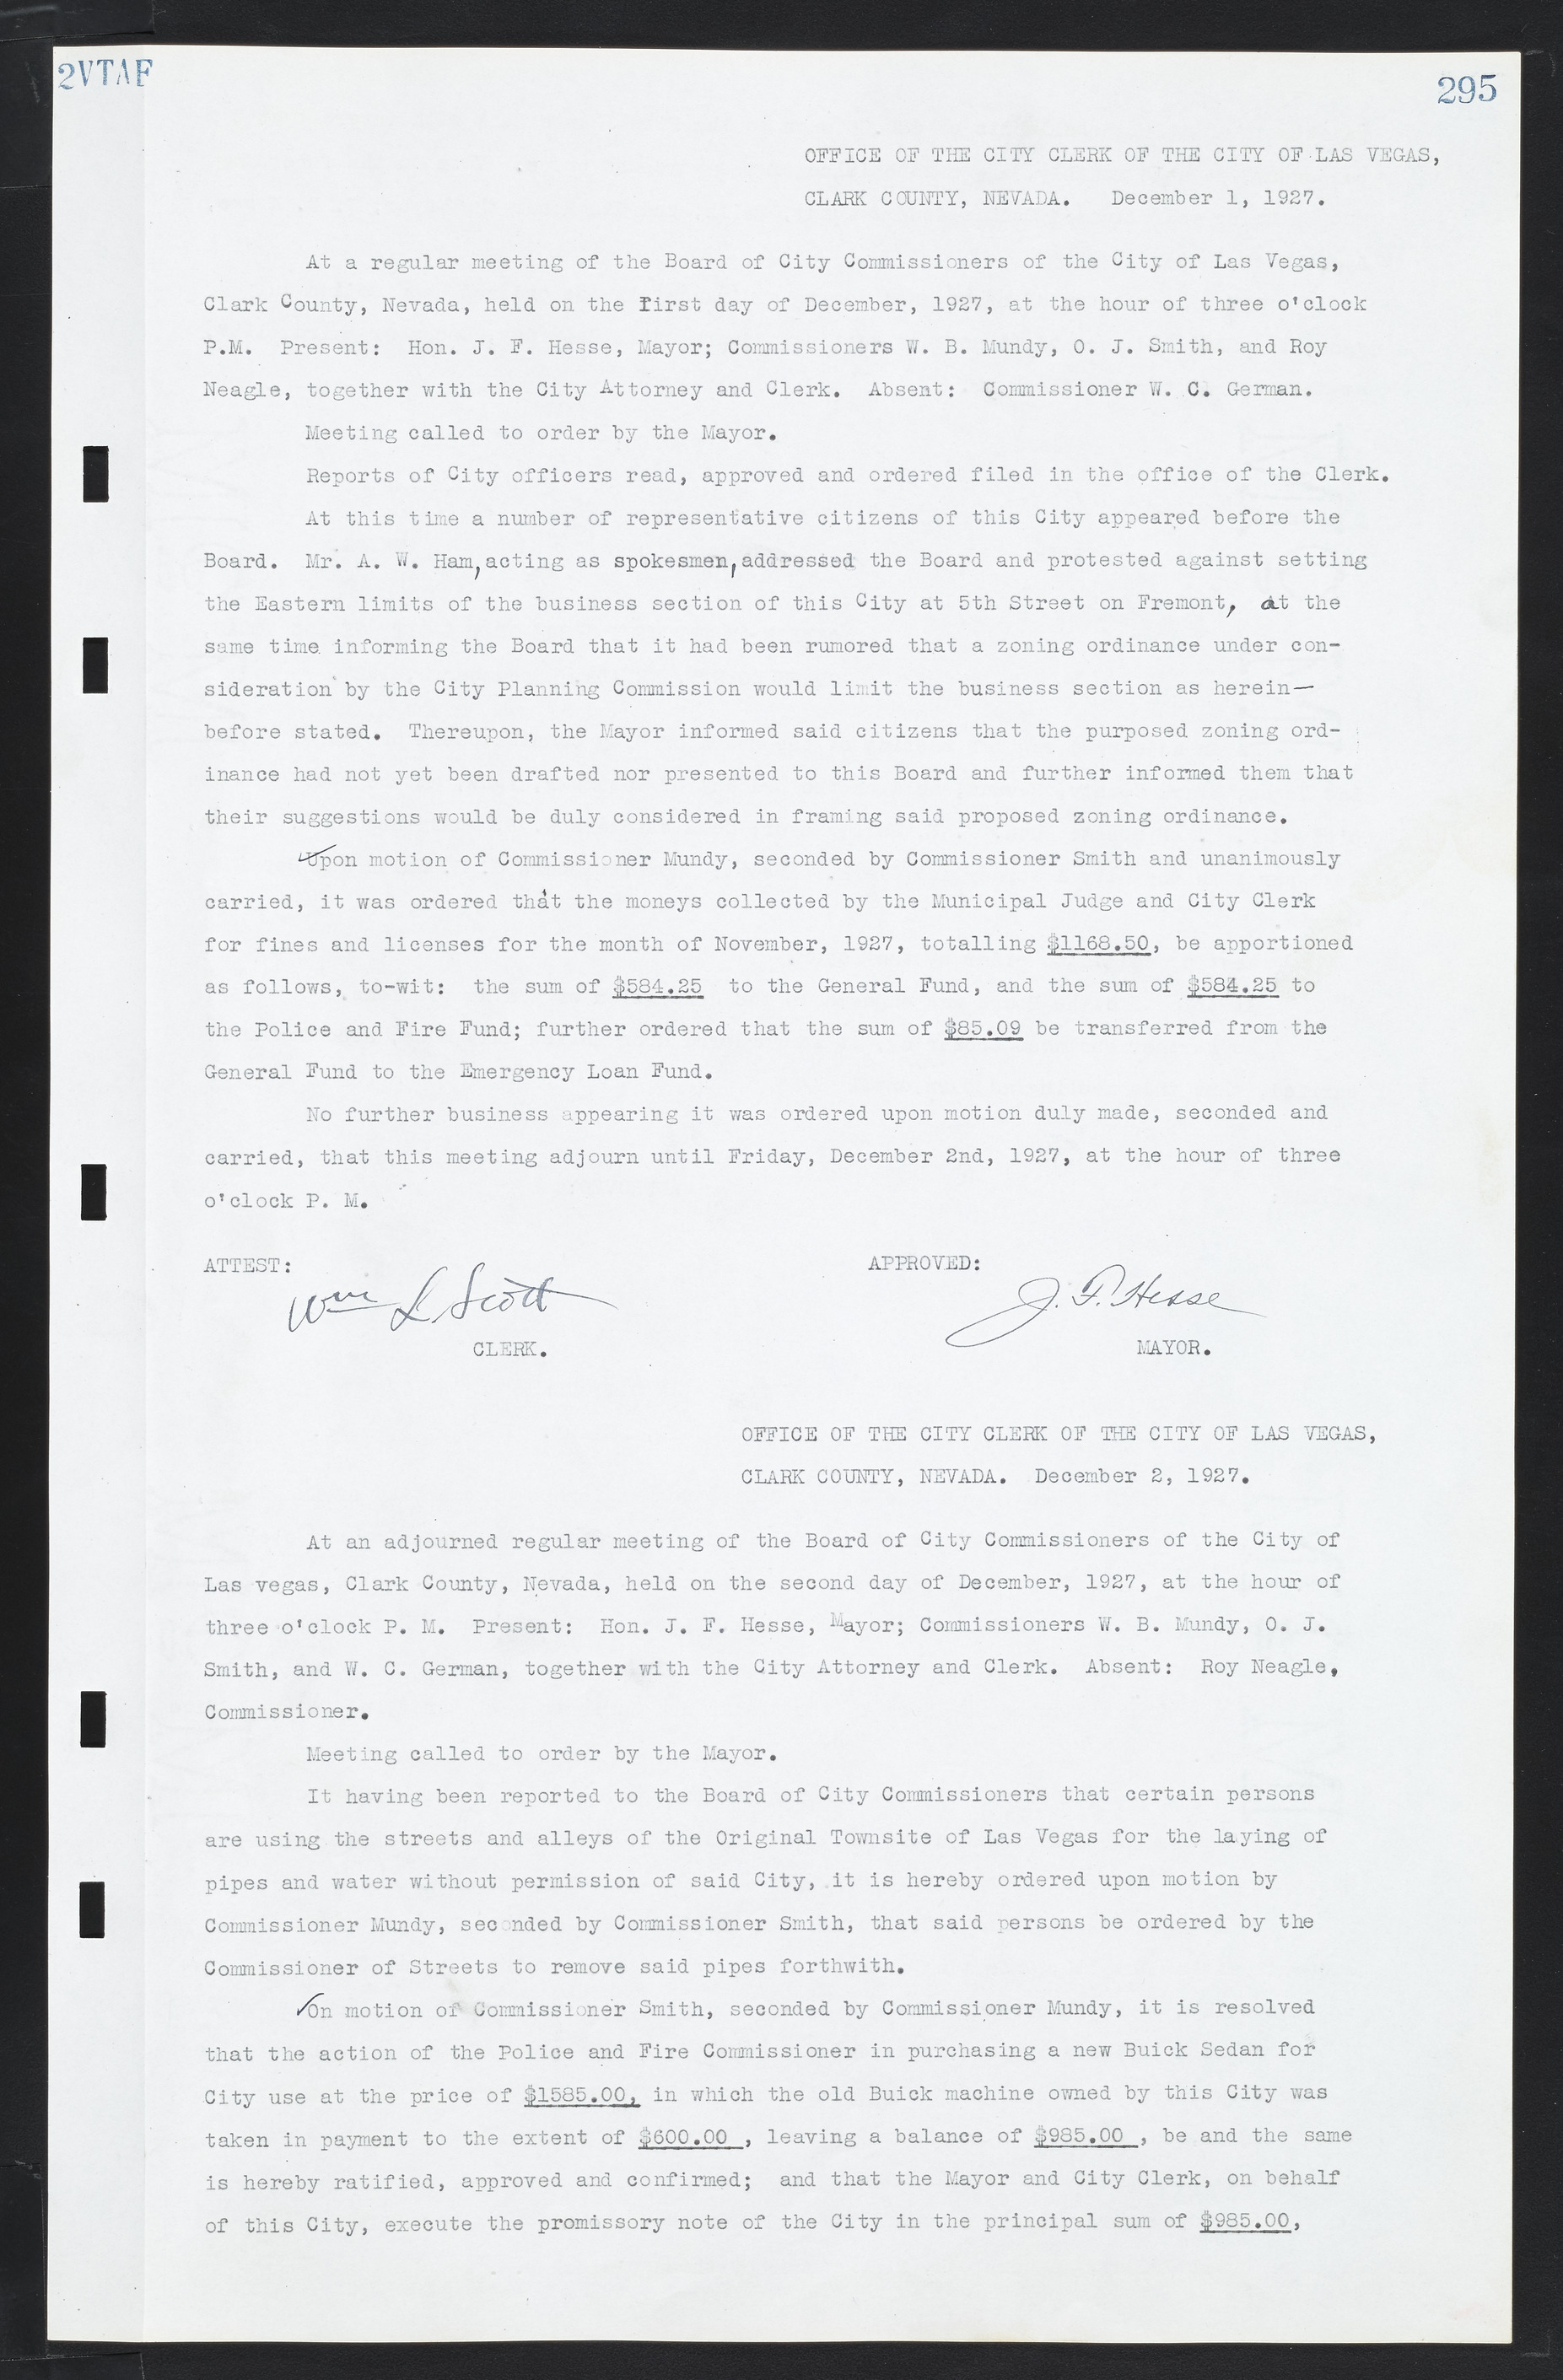 Las Vegas City Commission Minutes, March 1, 1922 to May 10, 1929, lvc000002-304